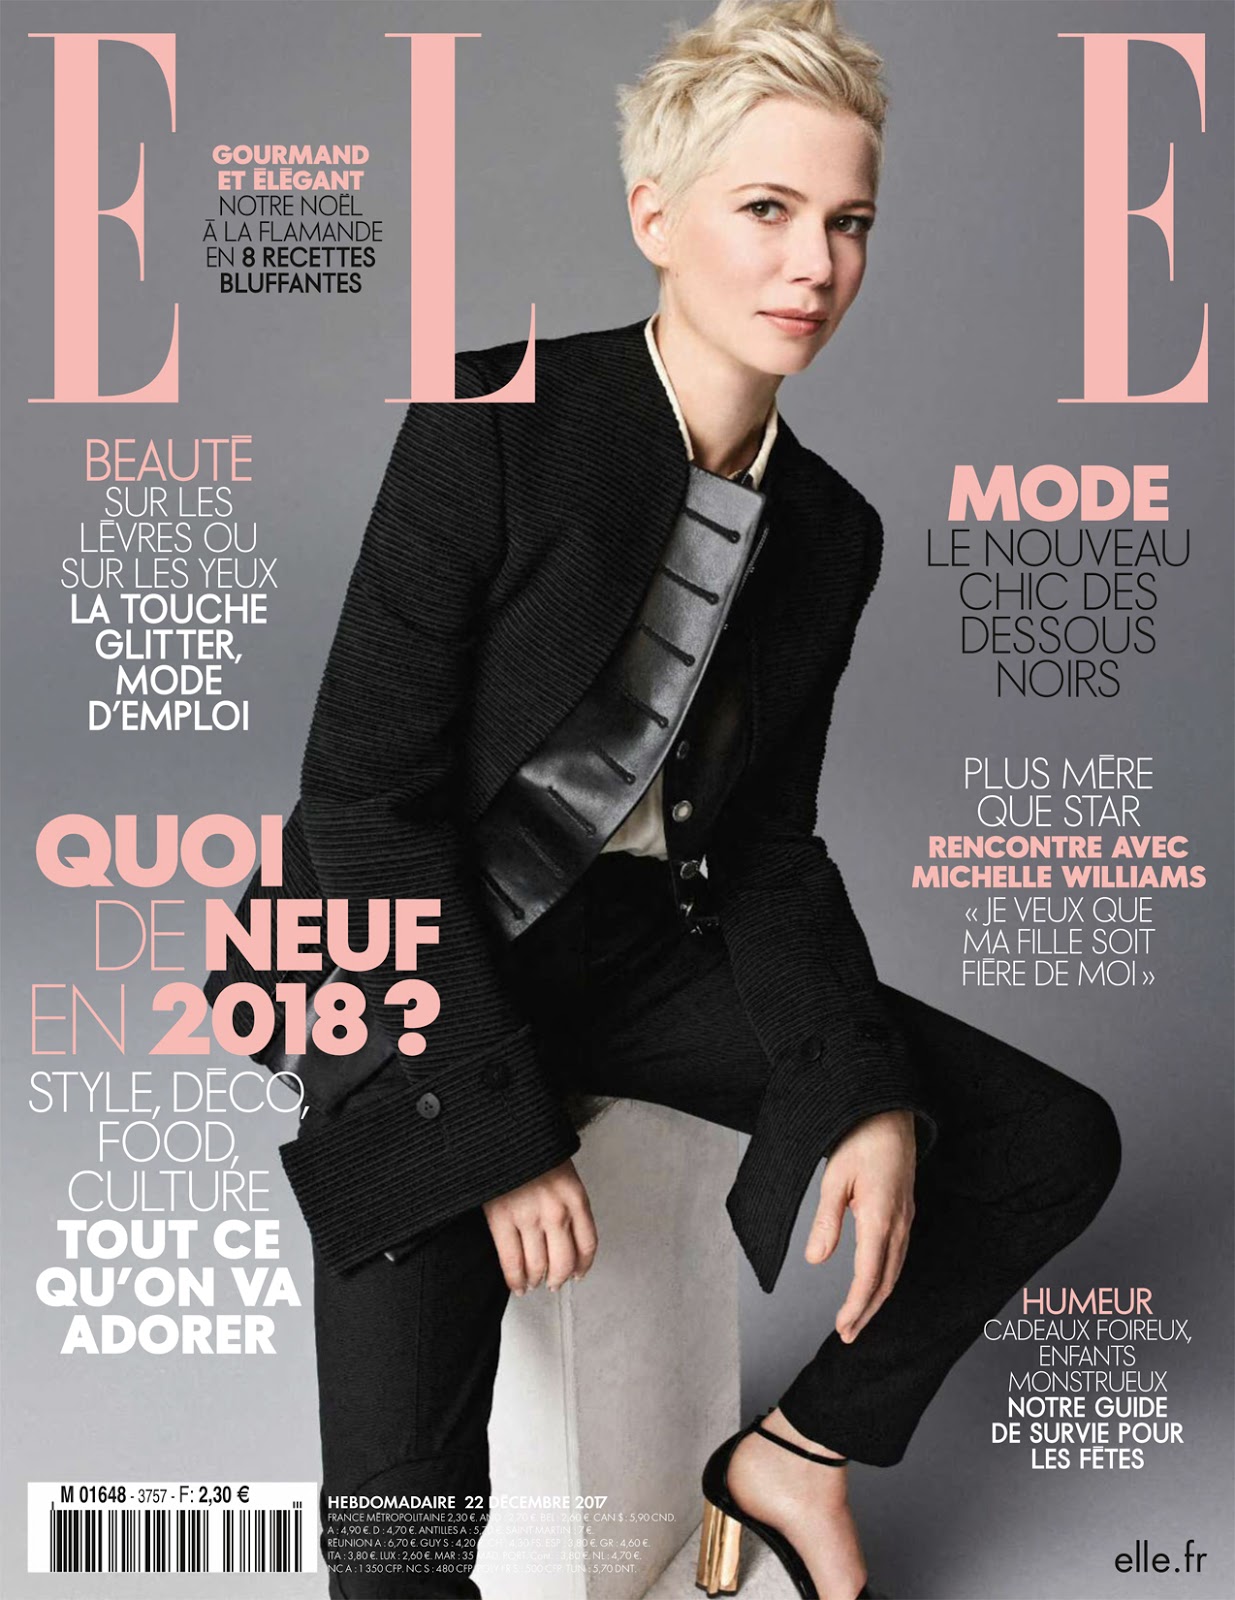 Michelle Williams ELLE January 2017 Cover Story - Michelle Williams  Interview